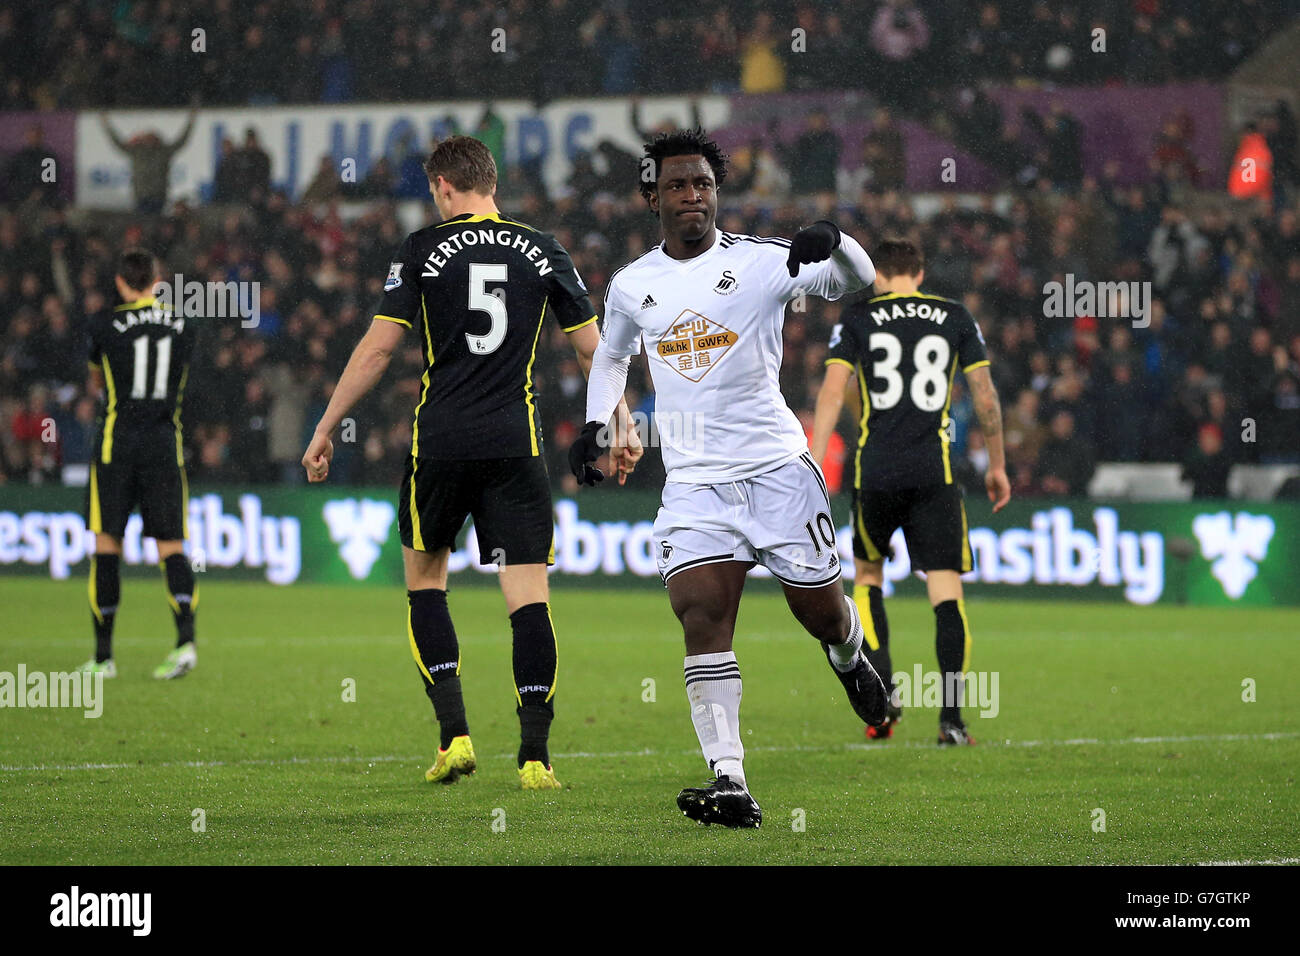 Swansea City's Wilfried Bony celebrates scoring their first goal of the game during the Barclays Premier League match at the Liberty Stadium, Swansea. PRESS ASSOCIATION Photo. Picture date: Sunday December 14, 2014. See PA story SOCCER Swansea. Photo credit should read Nick Potts/PA Wire. Maximum 45 images during a match. No video emulation or promotion as 'live'. No use in games, competitions, merchandise, betting or single club/player services. No use with unofficial audio, video, data, fixtures or club/league logos. Stock Photo